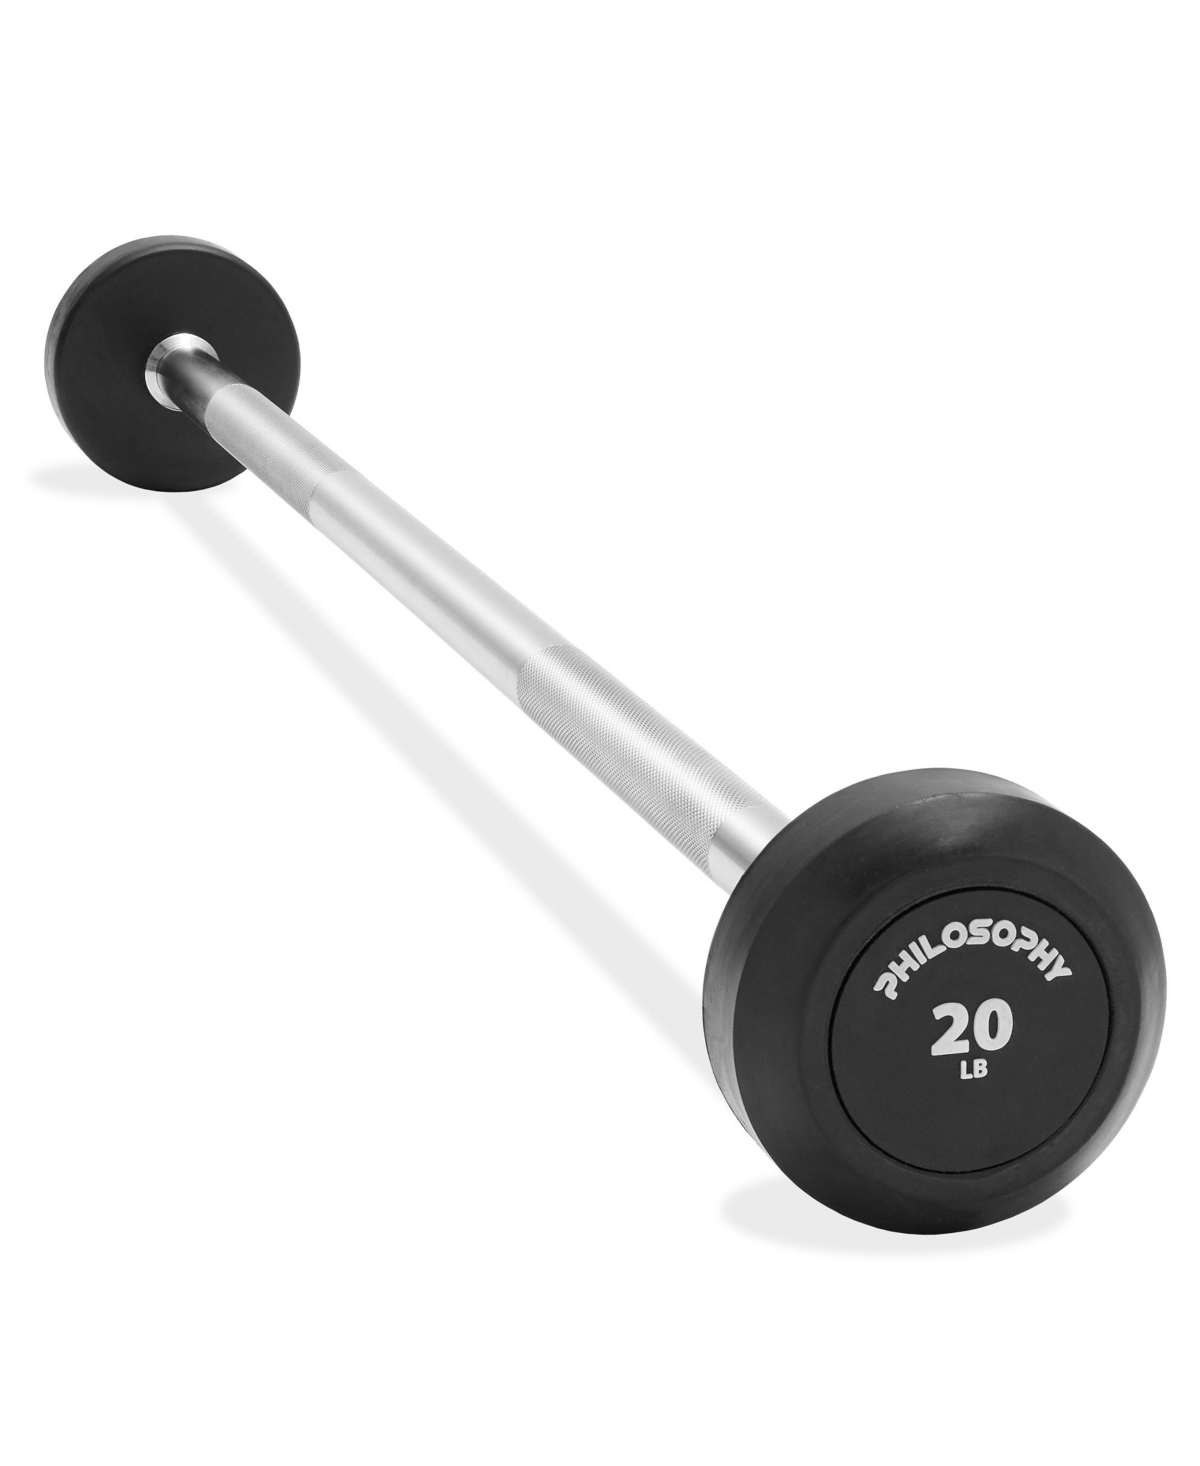 Rubber Fixed Barbell, 20 Lb Pre-Loaded Weight Straight Bar for Strength Training & Weightlifting - Black